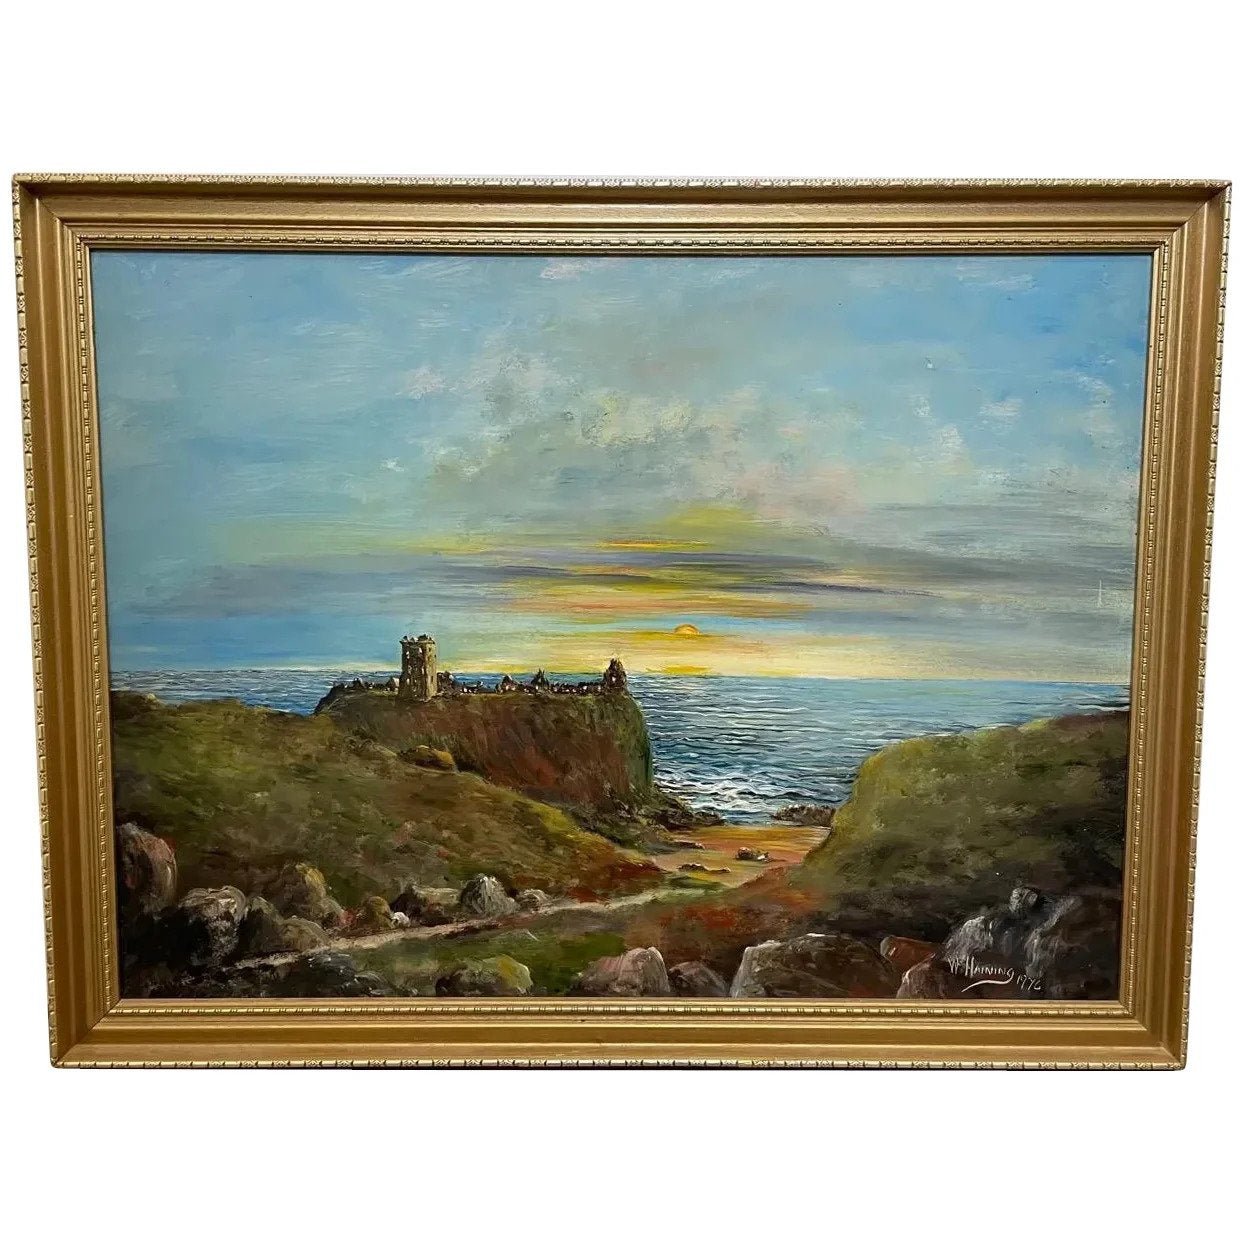 Scottish Oil Painting Medieval Ruin Dunnottar Castle At Sunrise By William Haining - Cheshire Antiques Consultant